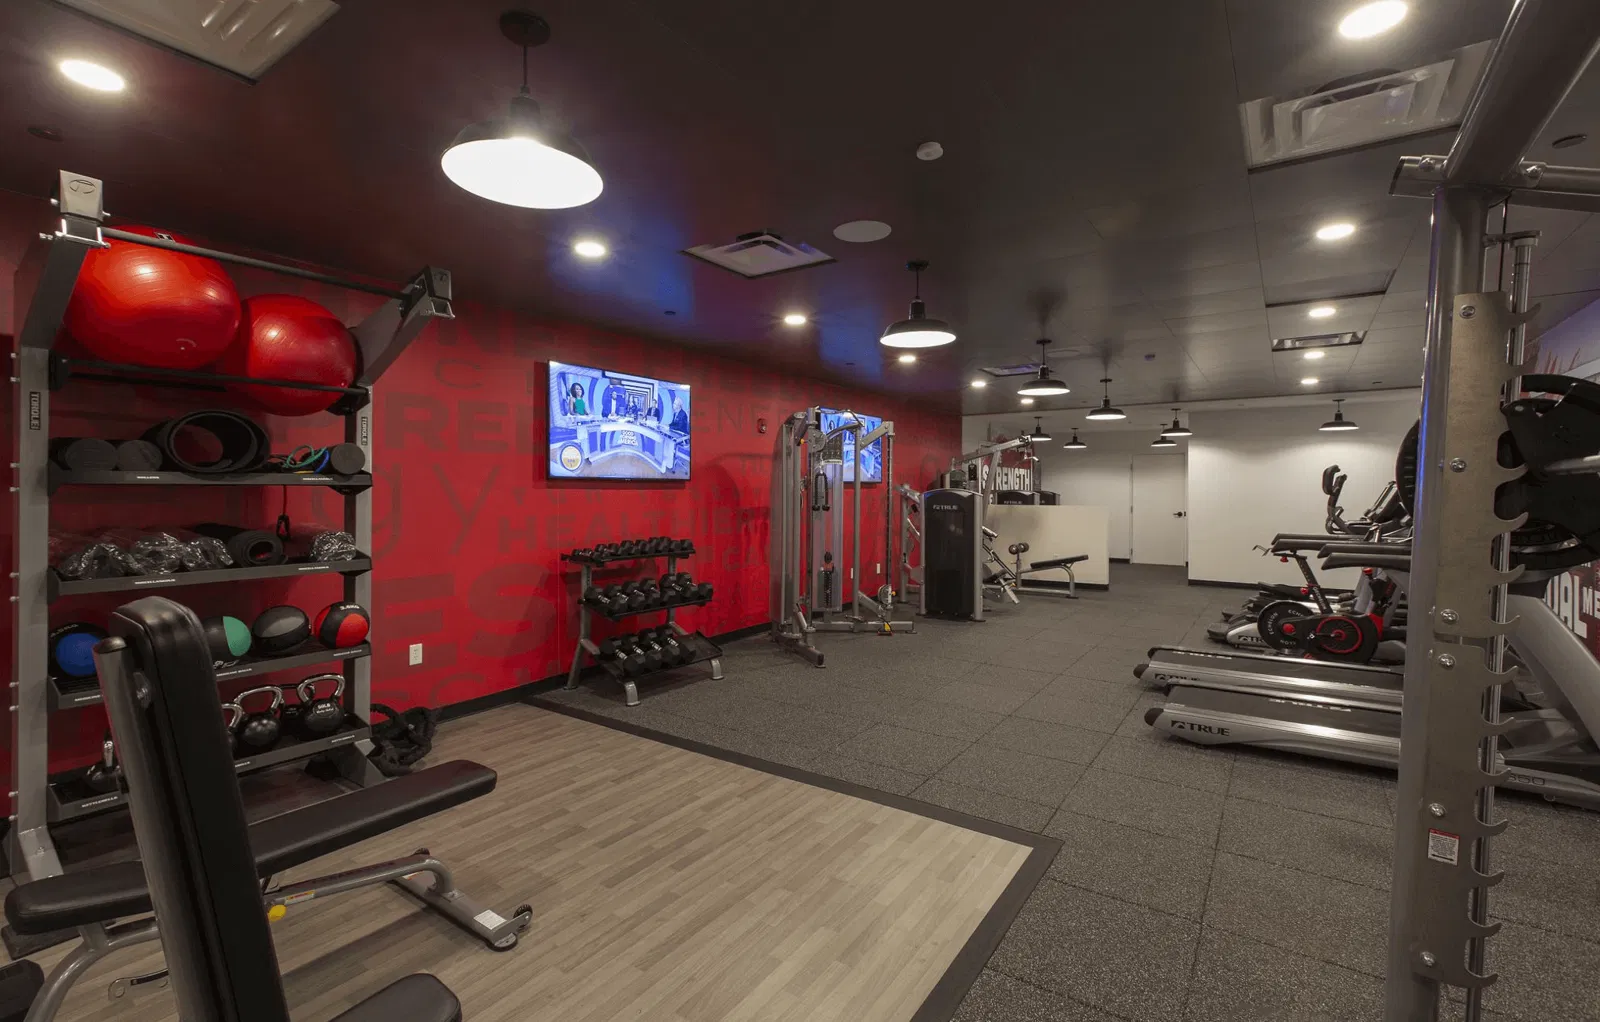 Compact gym room: a lot of balls and sports equipment. Red and white walls, with two TV on them.